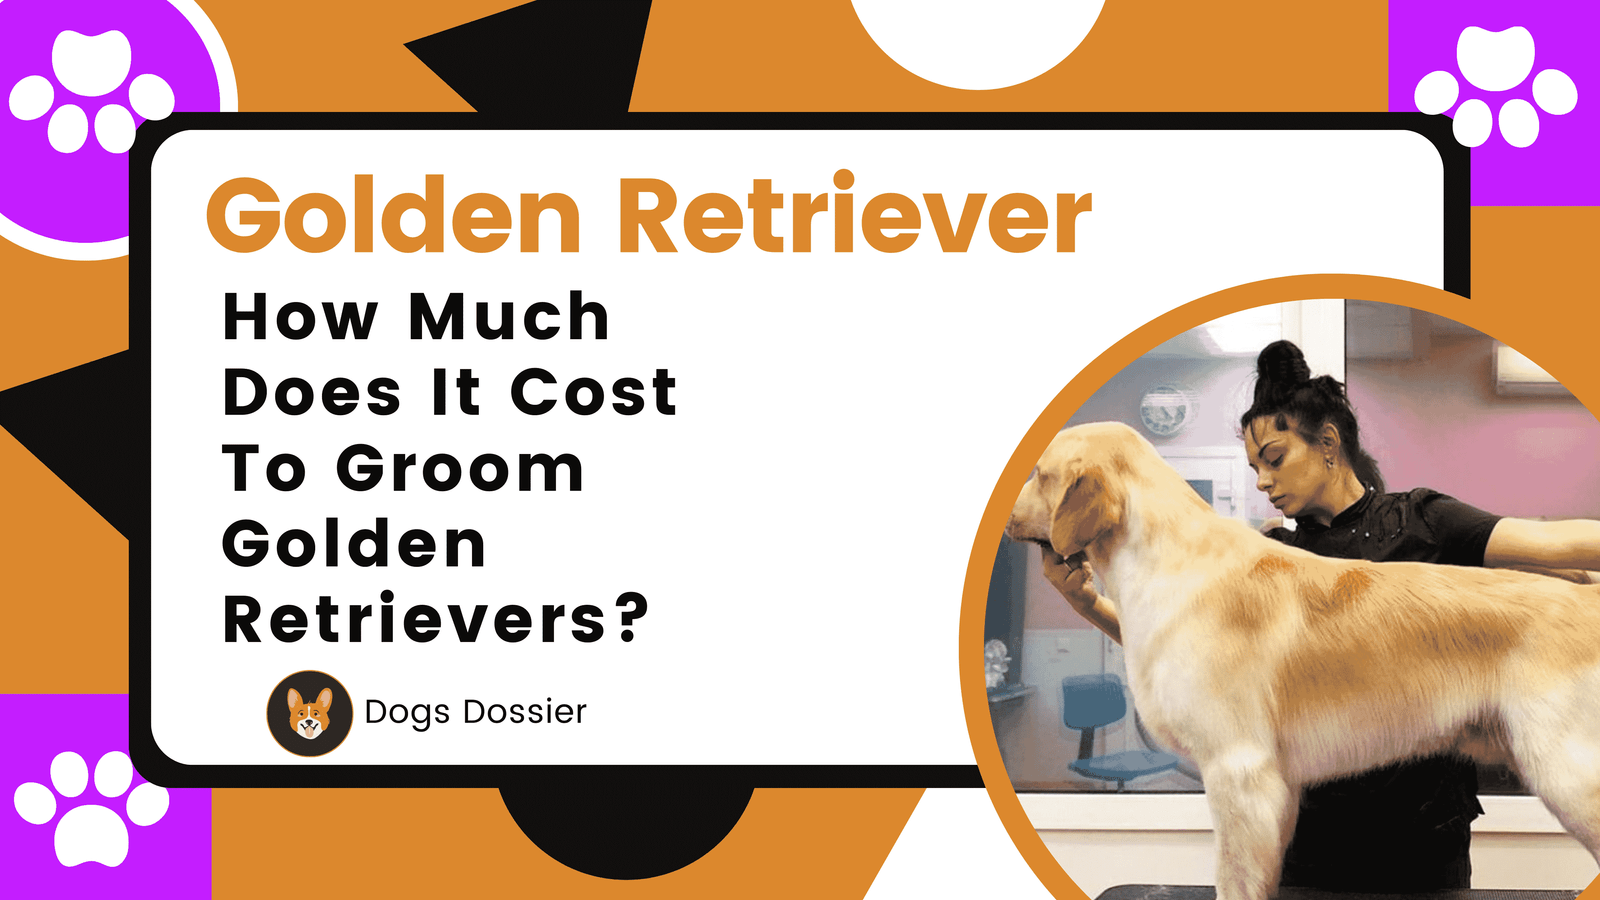 How Much Does it Cost To Groom a Golden Retriever?